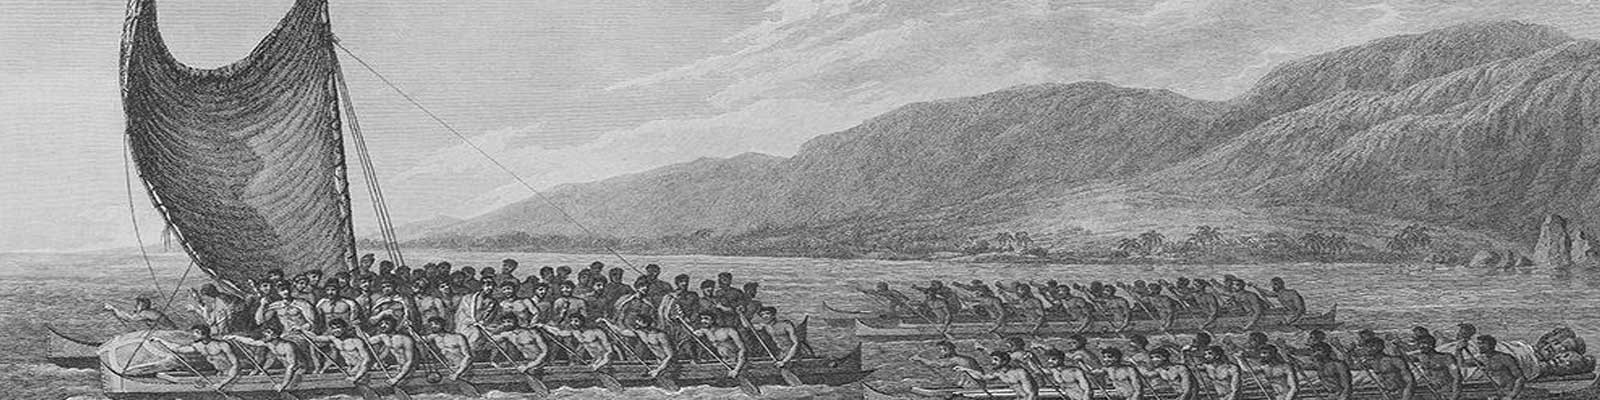 THE FIRST PACIFIC VOYAGERS